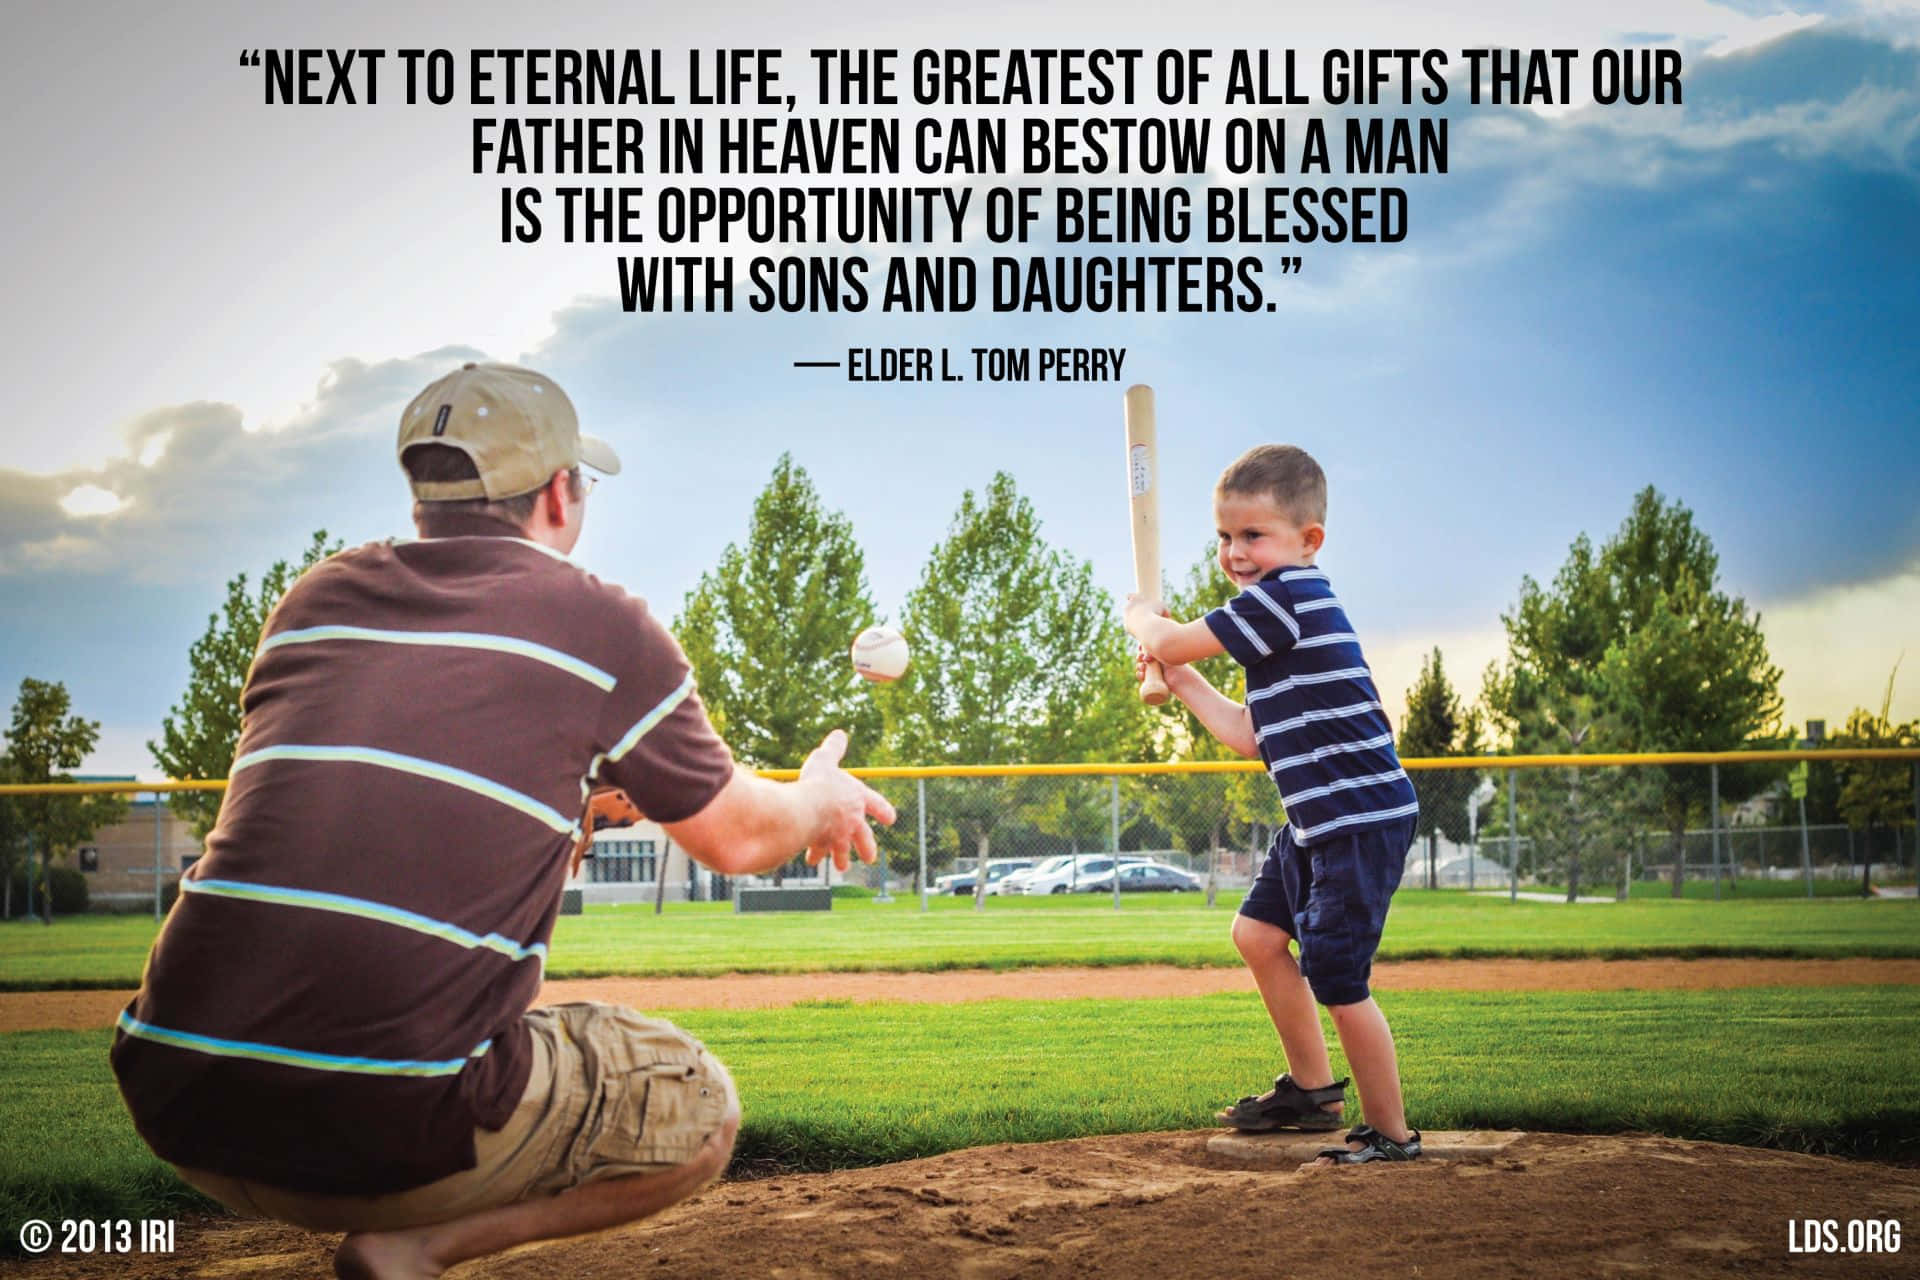 father's day baseball quotes